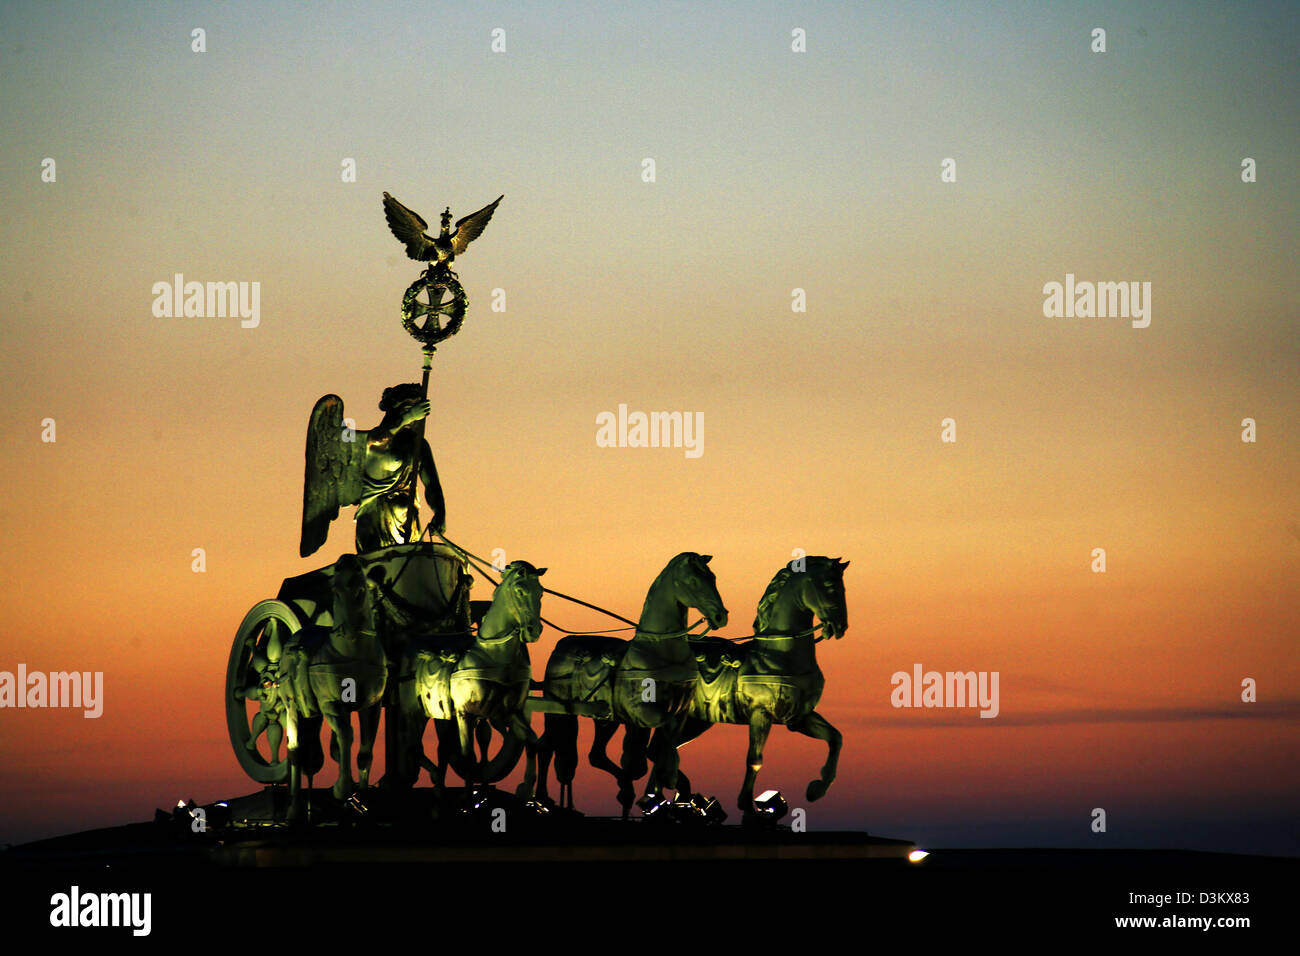 (dpa) - The picture shows the Quadriga statue on top of Brandenburg Gate during sunset in Berlin, Germany, Tuesday 20 September 2005. Brandenburg Gate is Berlin's most significant symbol representing the German union. The Quadriga sculpture was designed by Johann Gottfried Schadow and set up in 1794. Photo: Michael Hanschke Stock Photo